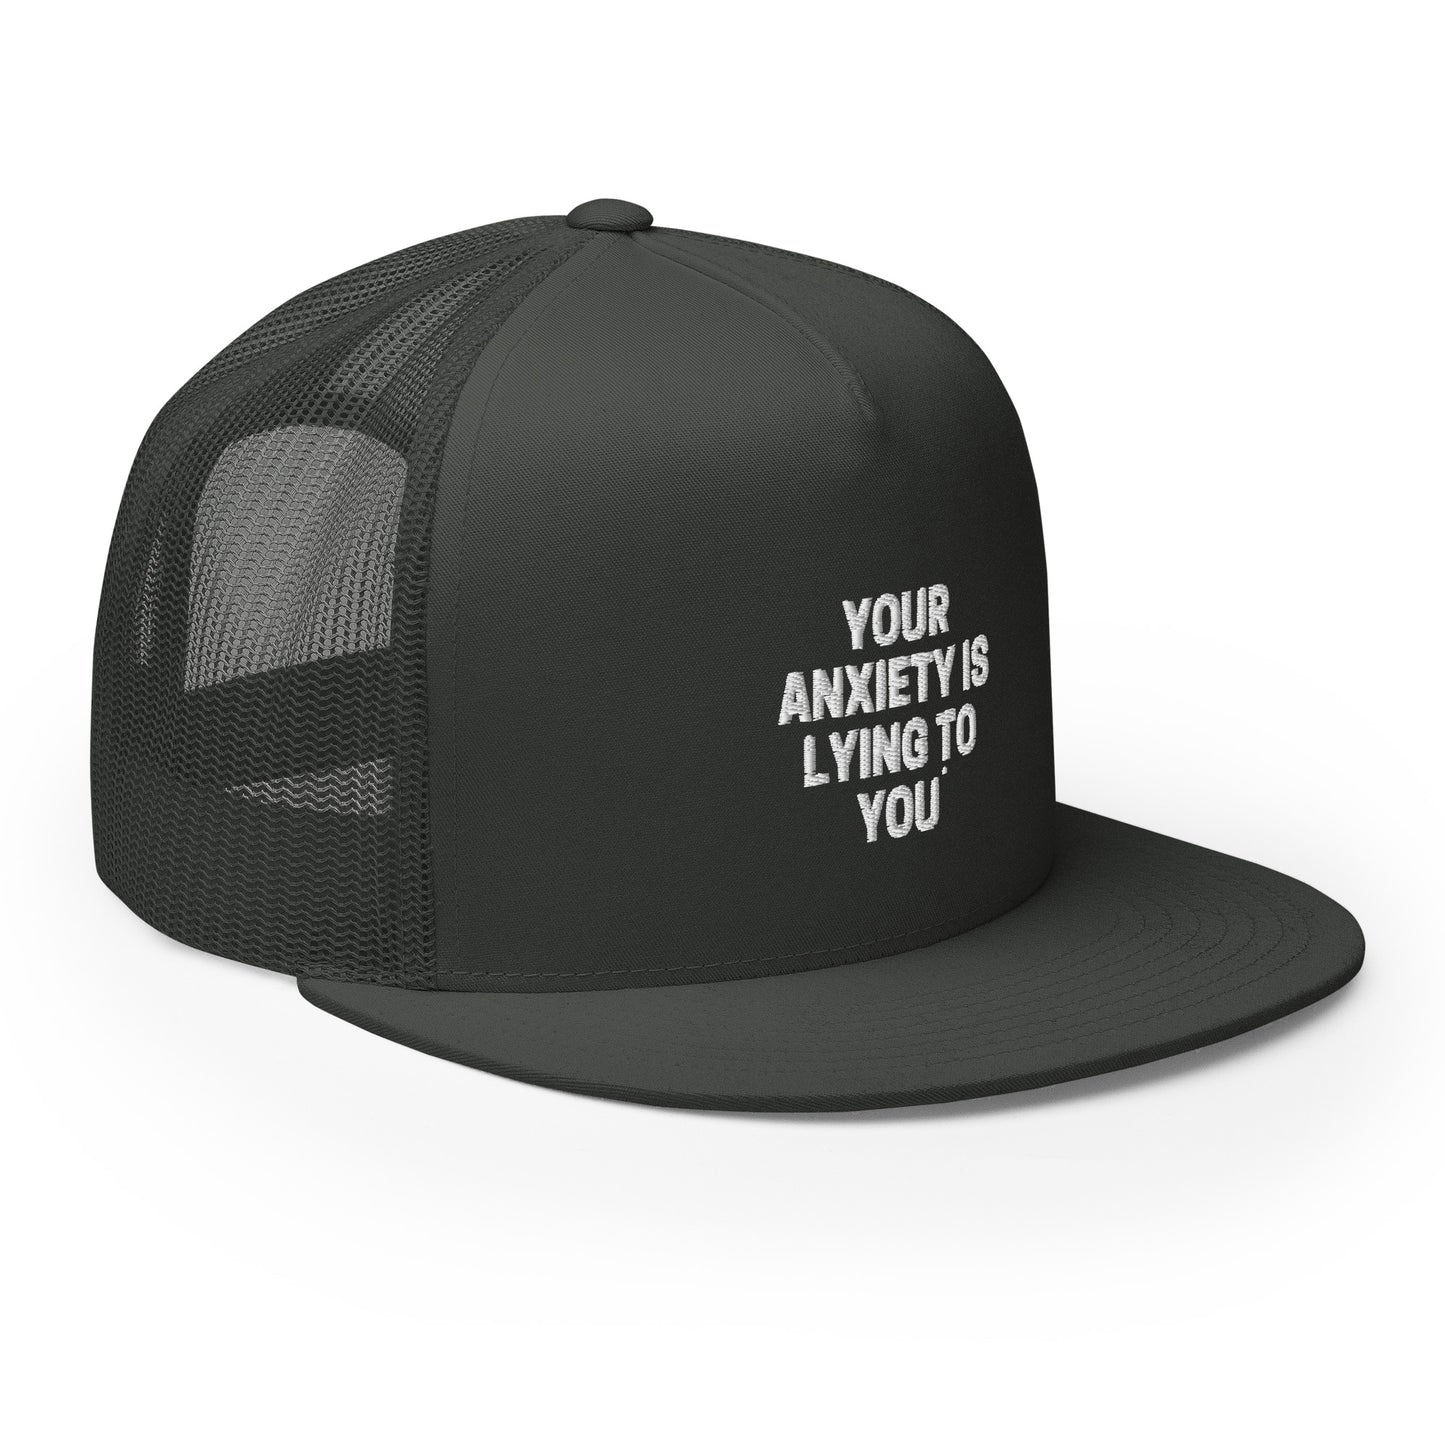 Your Anxiety is Lying to You Trucker Cap